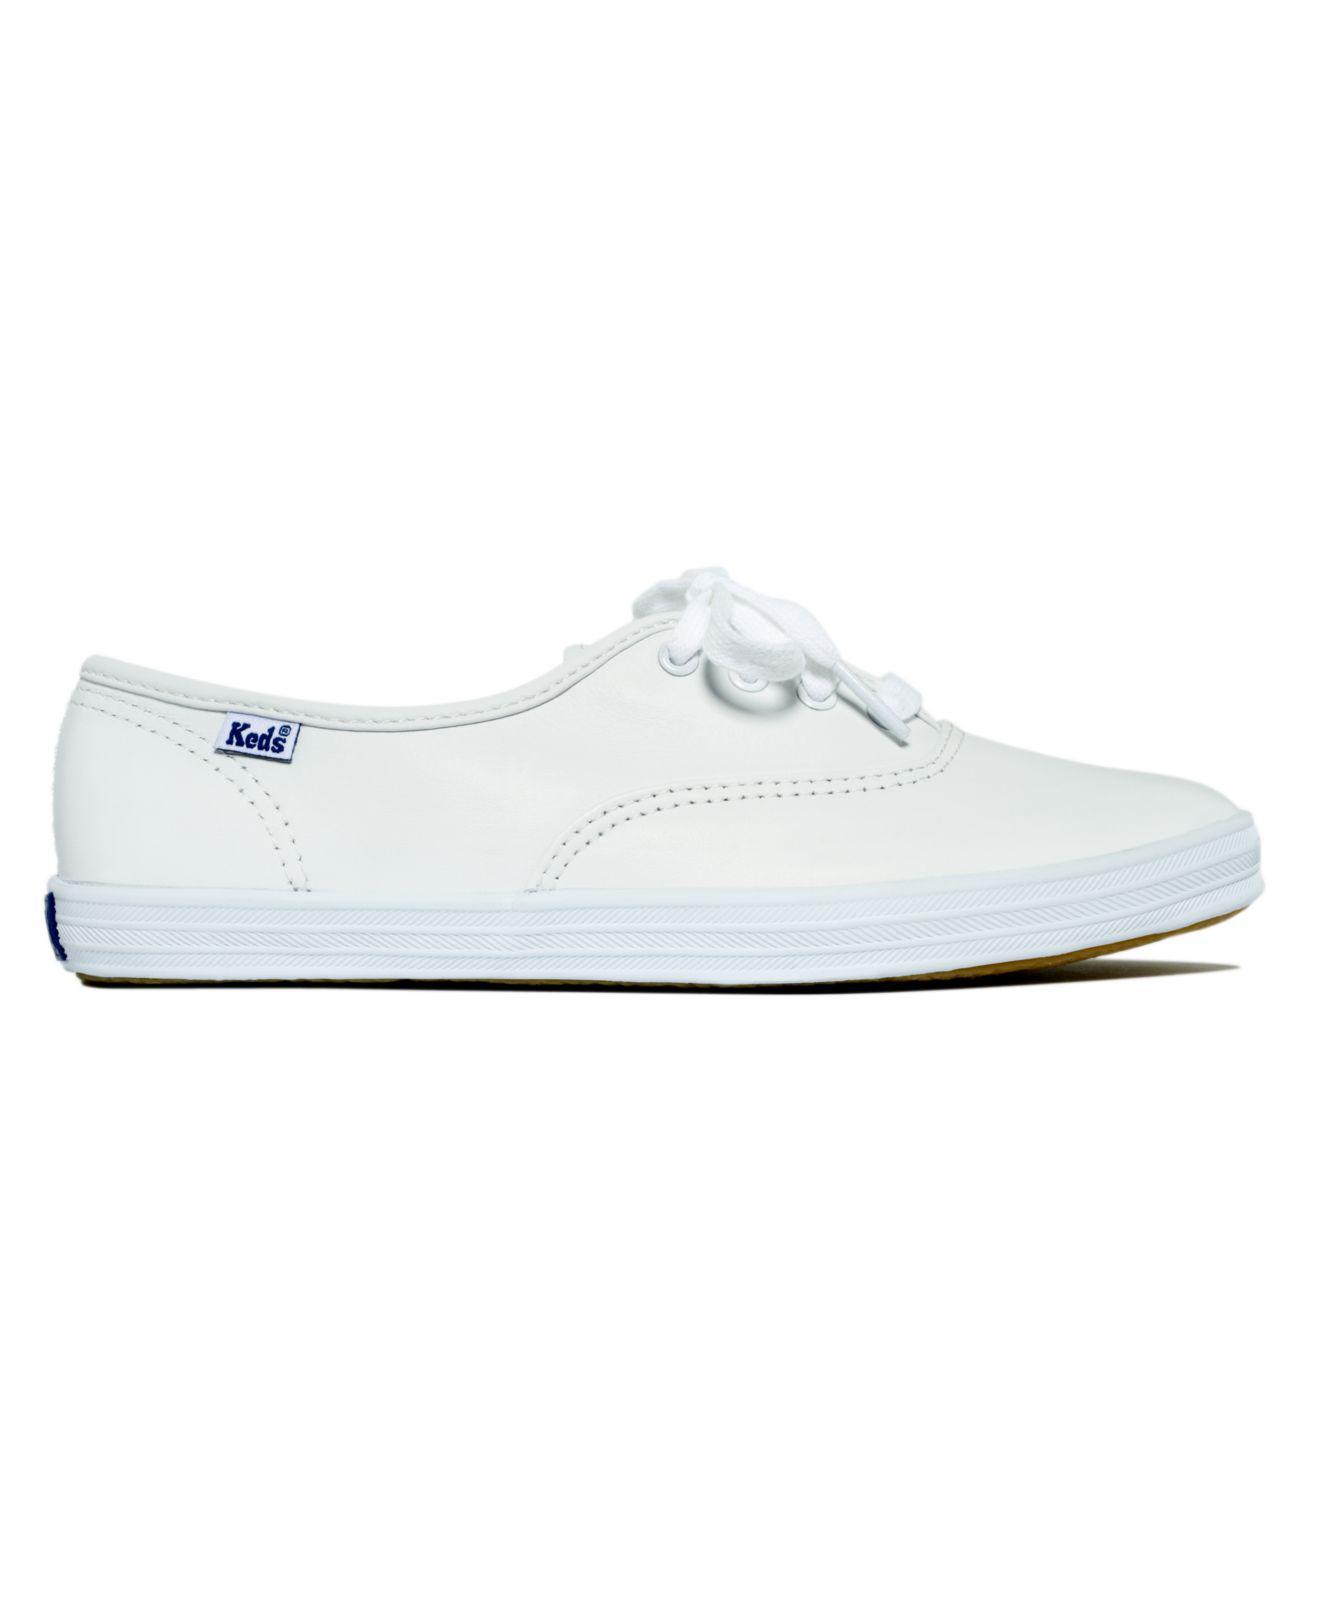 Keds Leather Champion Oxford Sneakers 